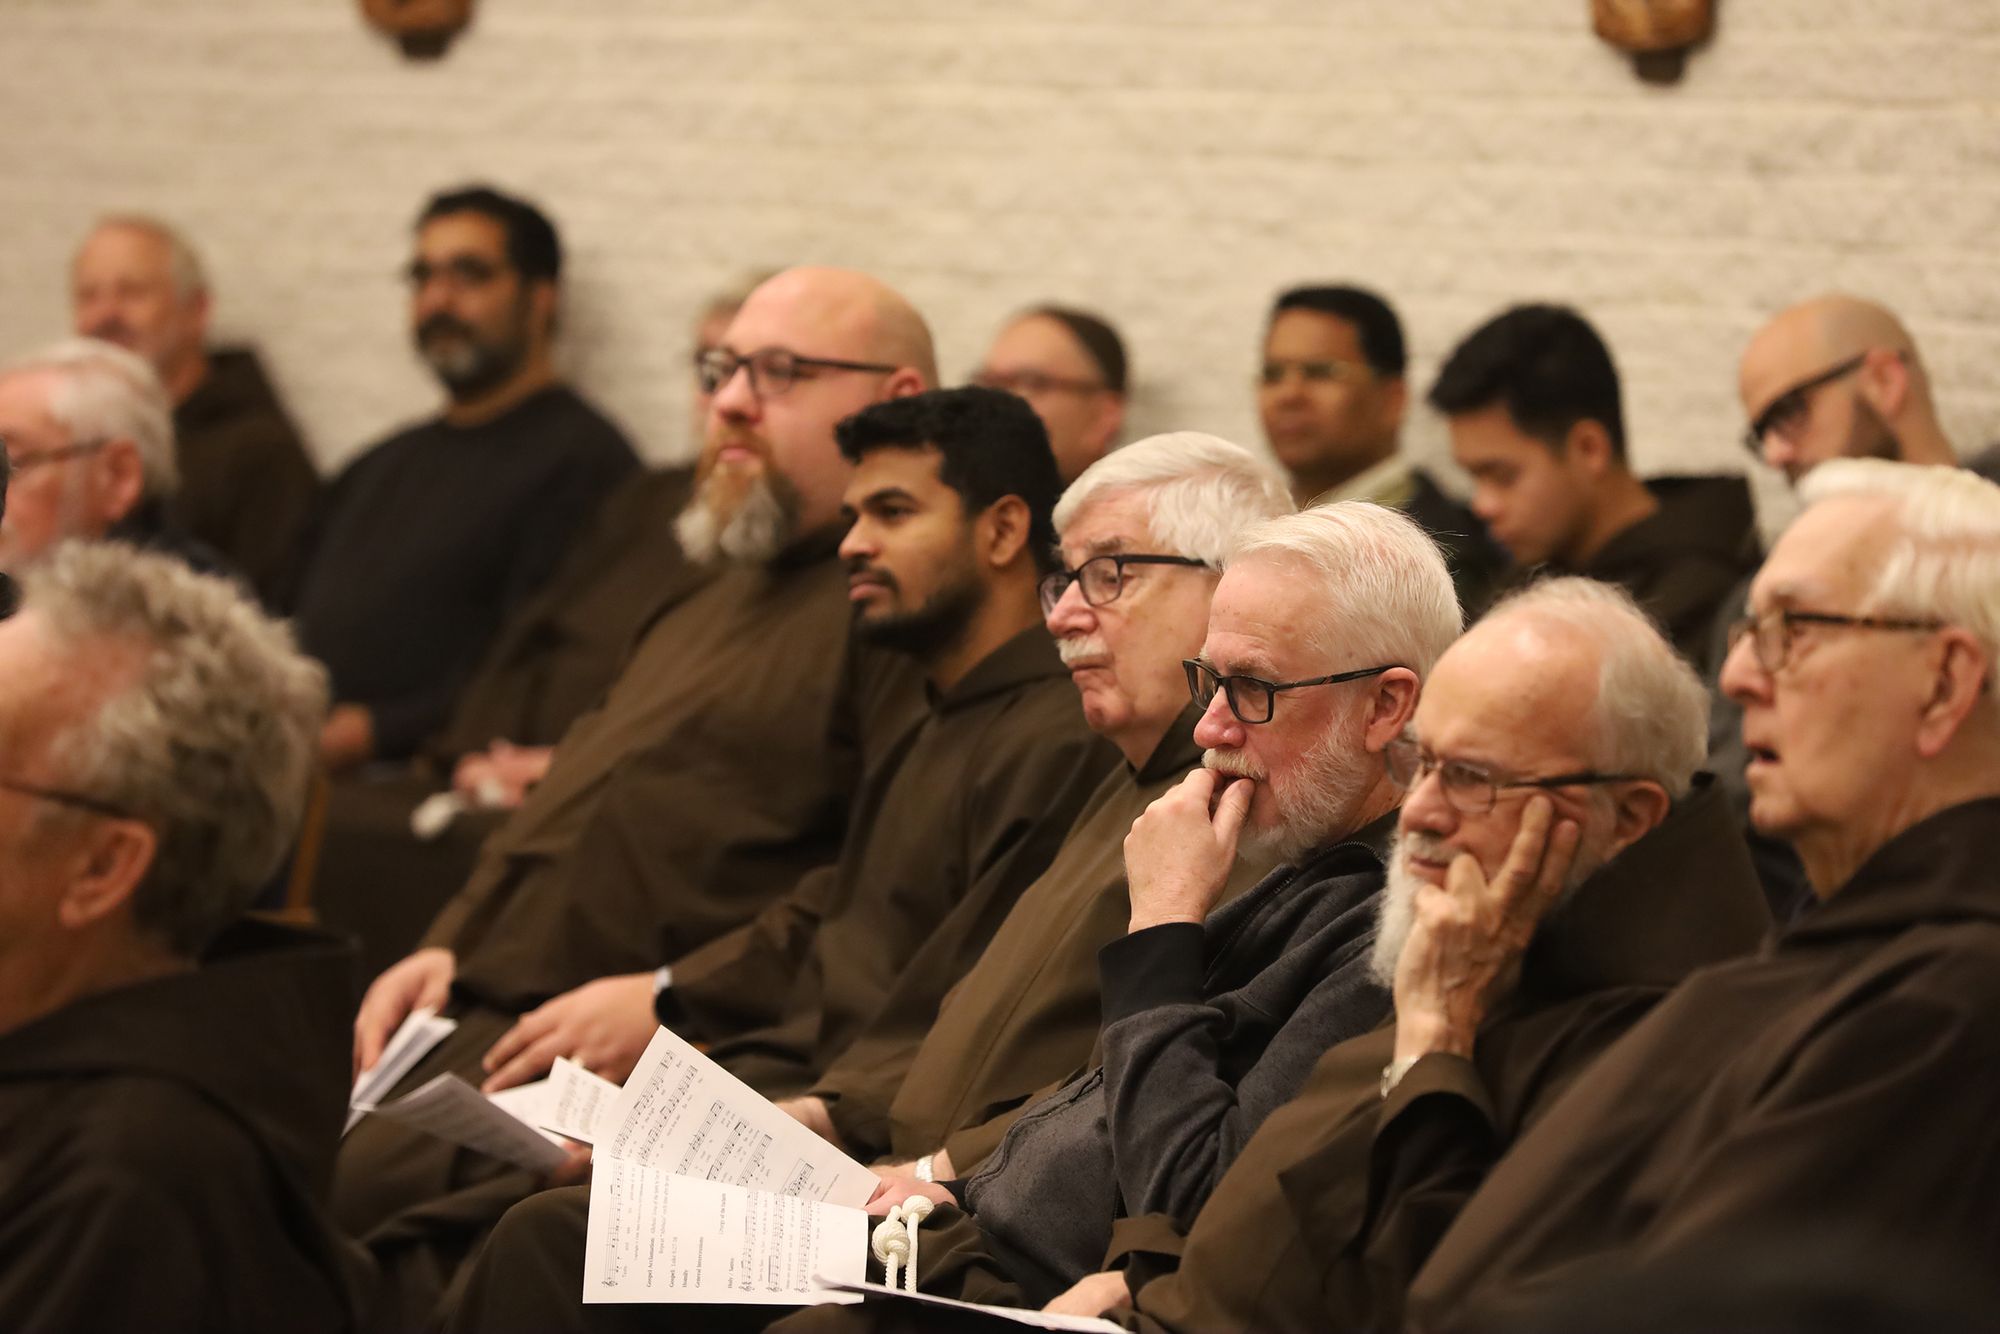 The friars listen intently during a session at the 2021 Chapter of Affairs